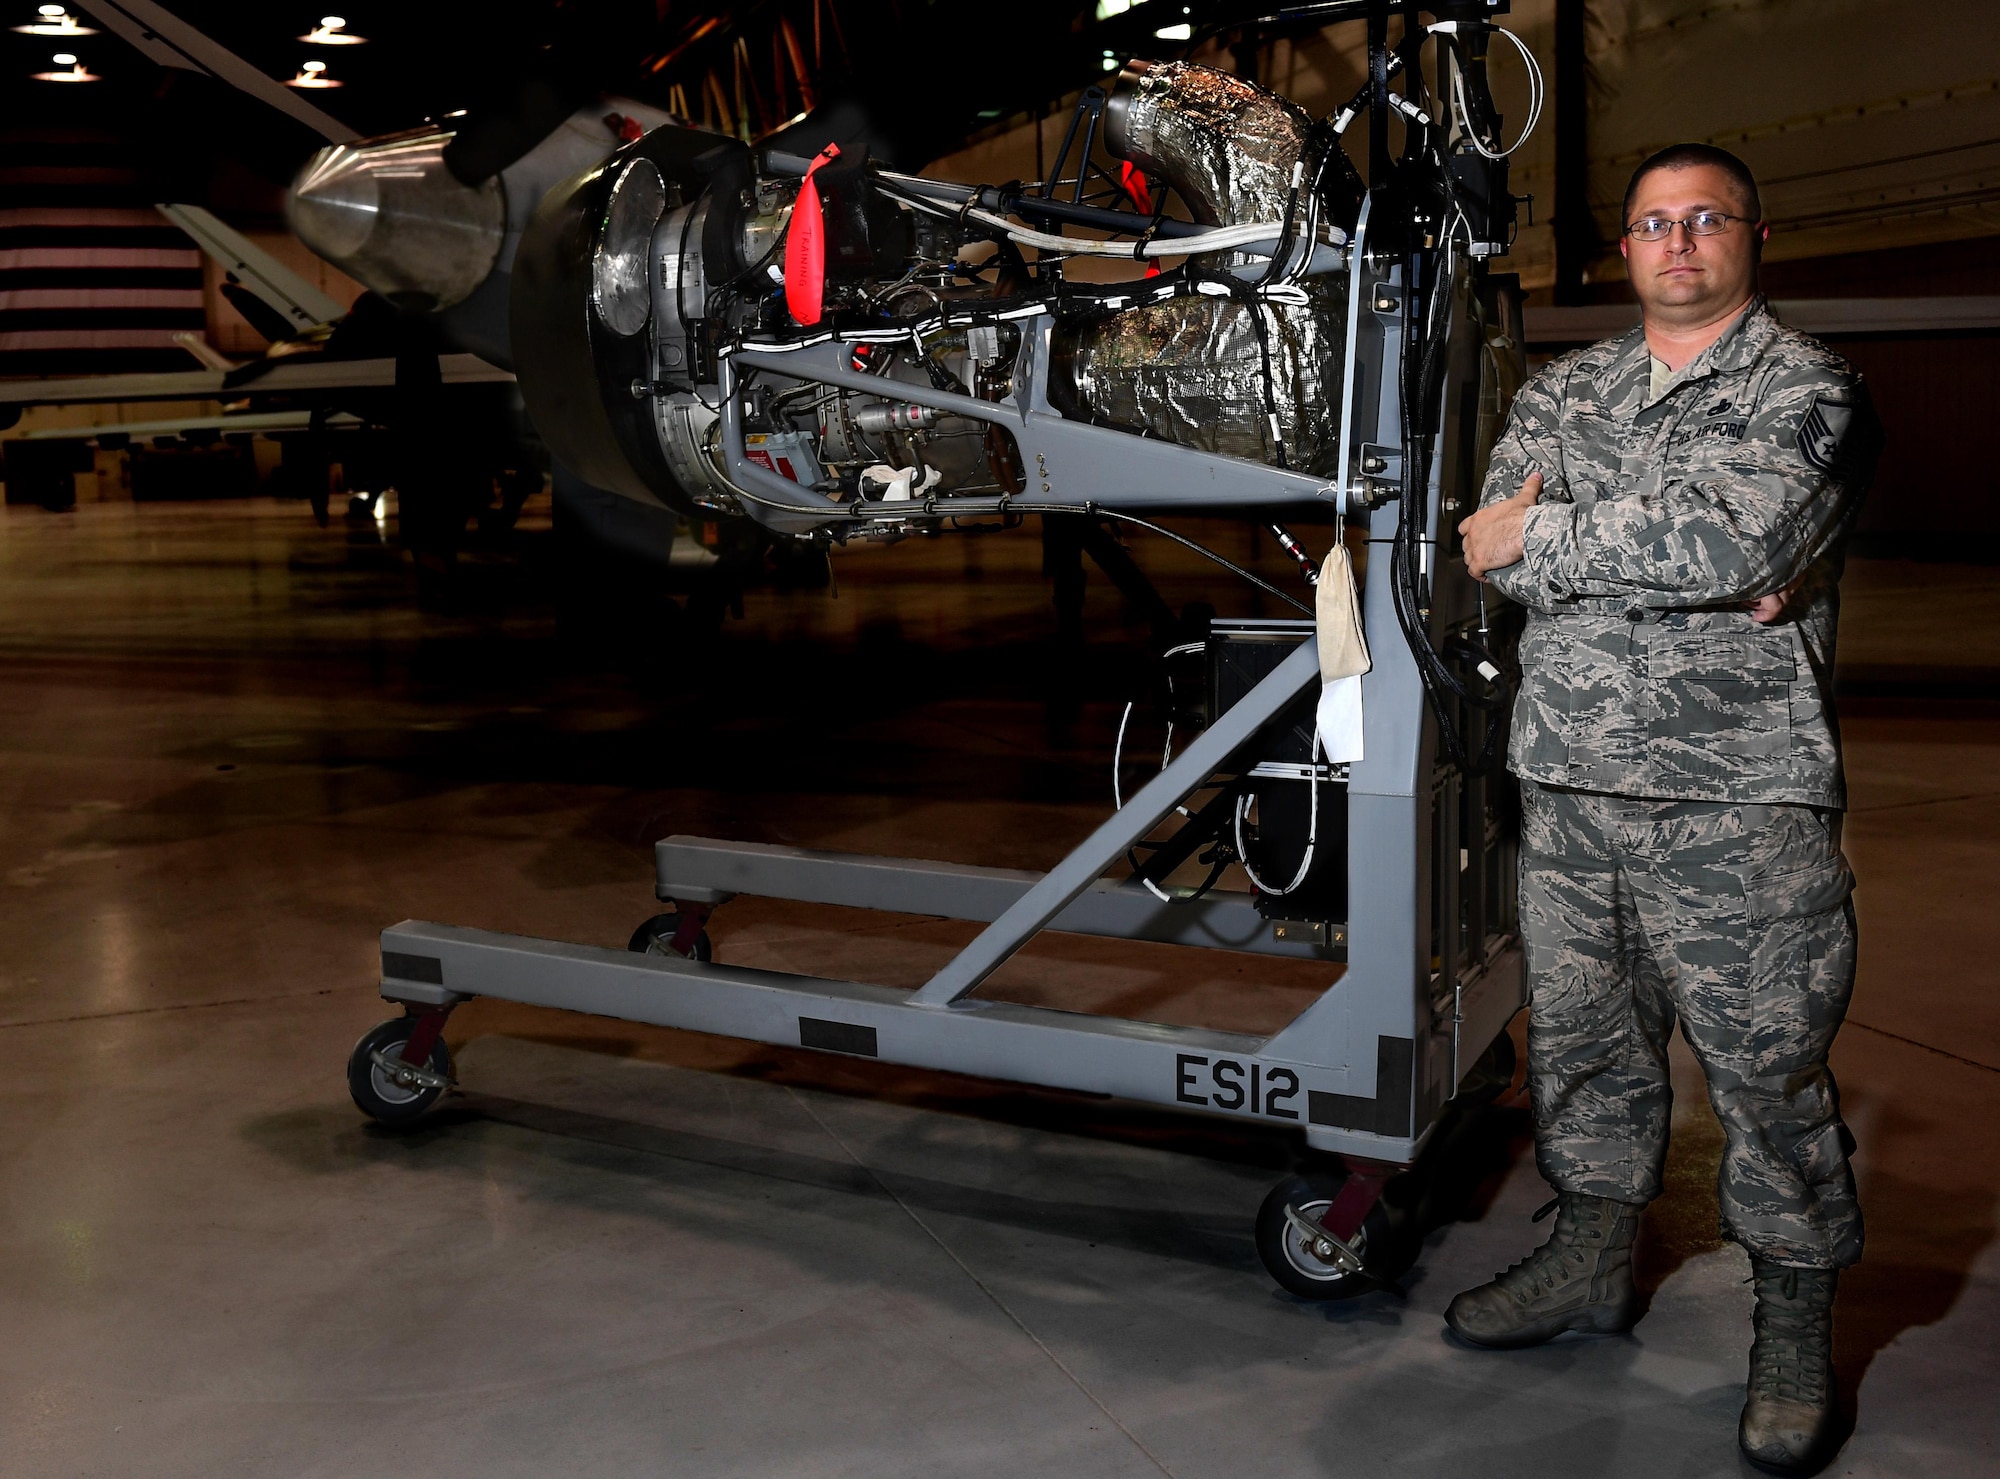 Master Sgt. Eric, 432nd Aircraft Maintenance Squadron Reaper Aircraft Maintenance Unit production superintendent, stands with the engine trainer he created June 19, 2017, at Creech Air Force Base, Nev. He saw a need to have a power capable training engine to practice engine rigging, which involves tuning the actuators that translate electrical signals to mechanical commands. If done improperly the engine can shutoff when not intended. The trainer allowed maintainers to train on this vital task without taking an operational aircraft out of the rotation. (U.S. Air Force photo/Senior Airman Christian Clausen) 